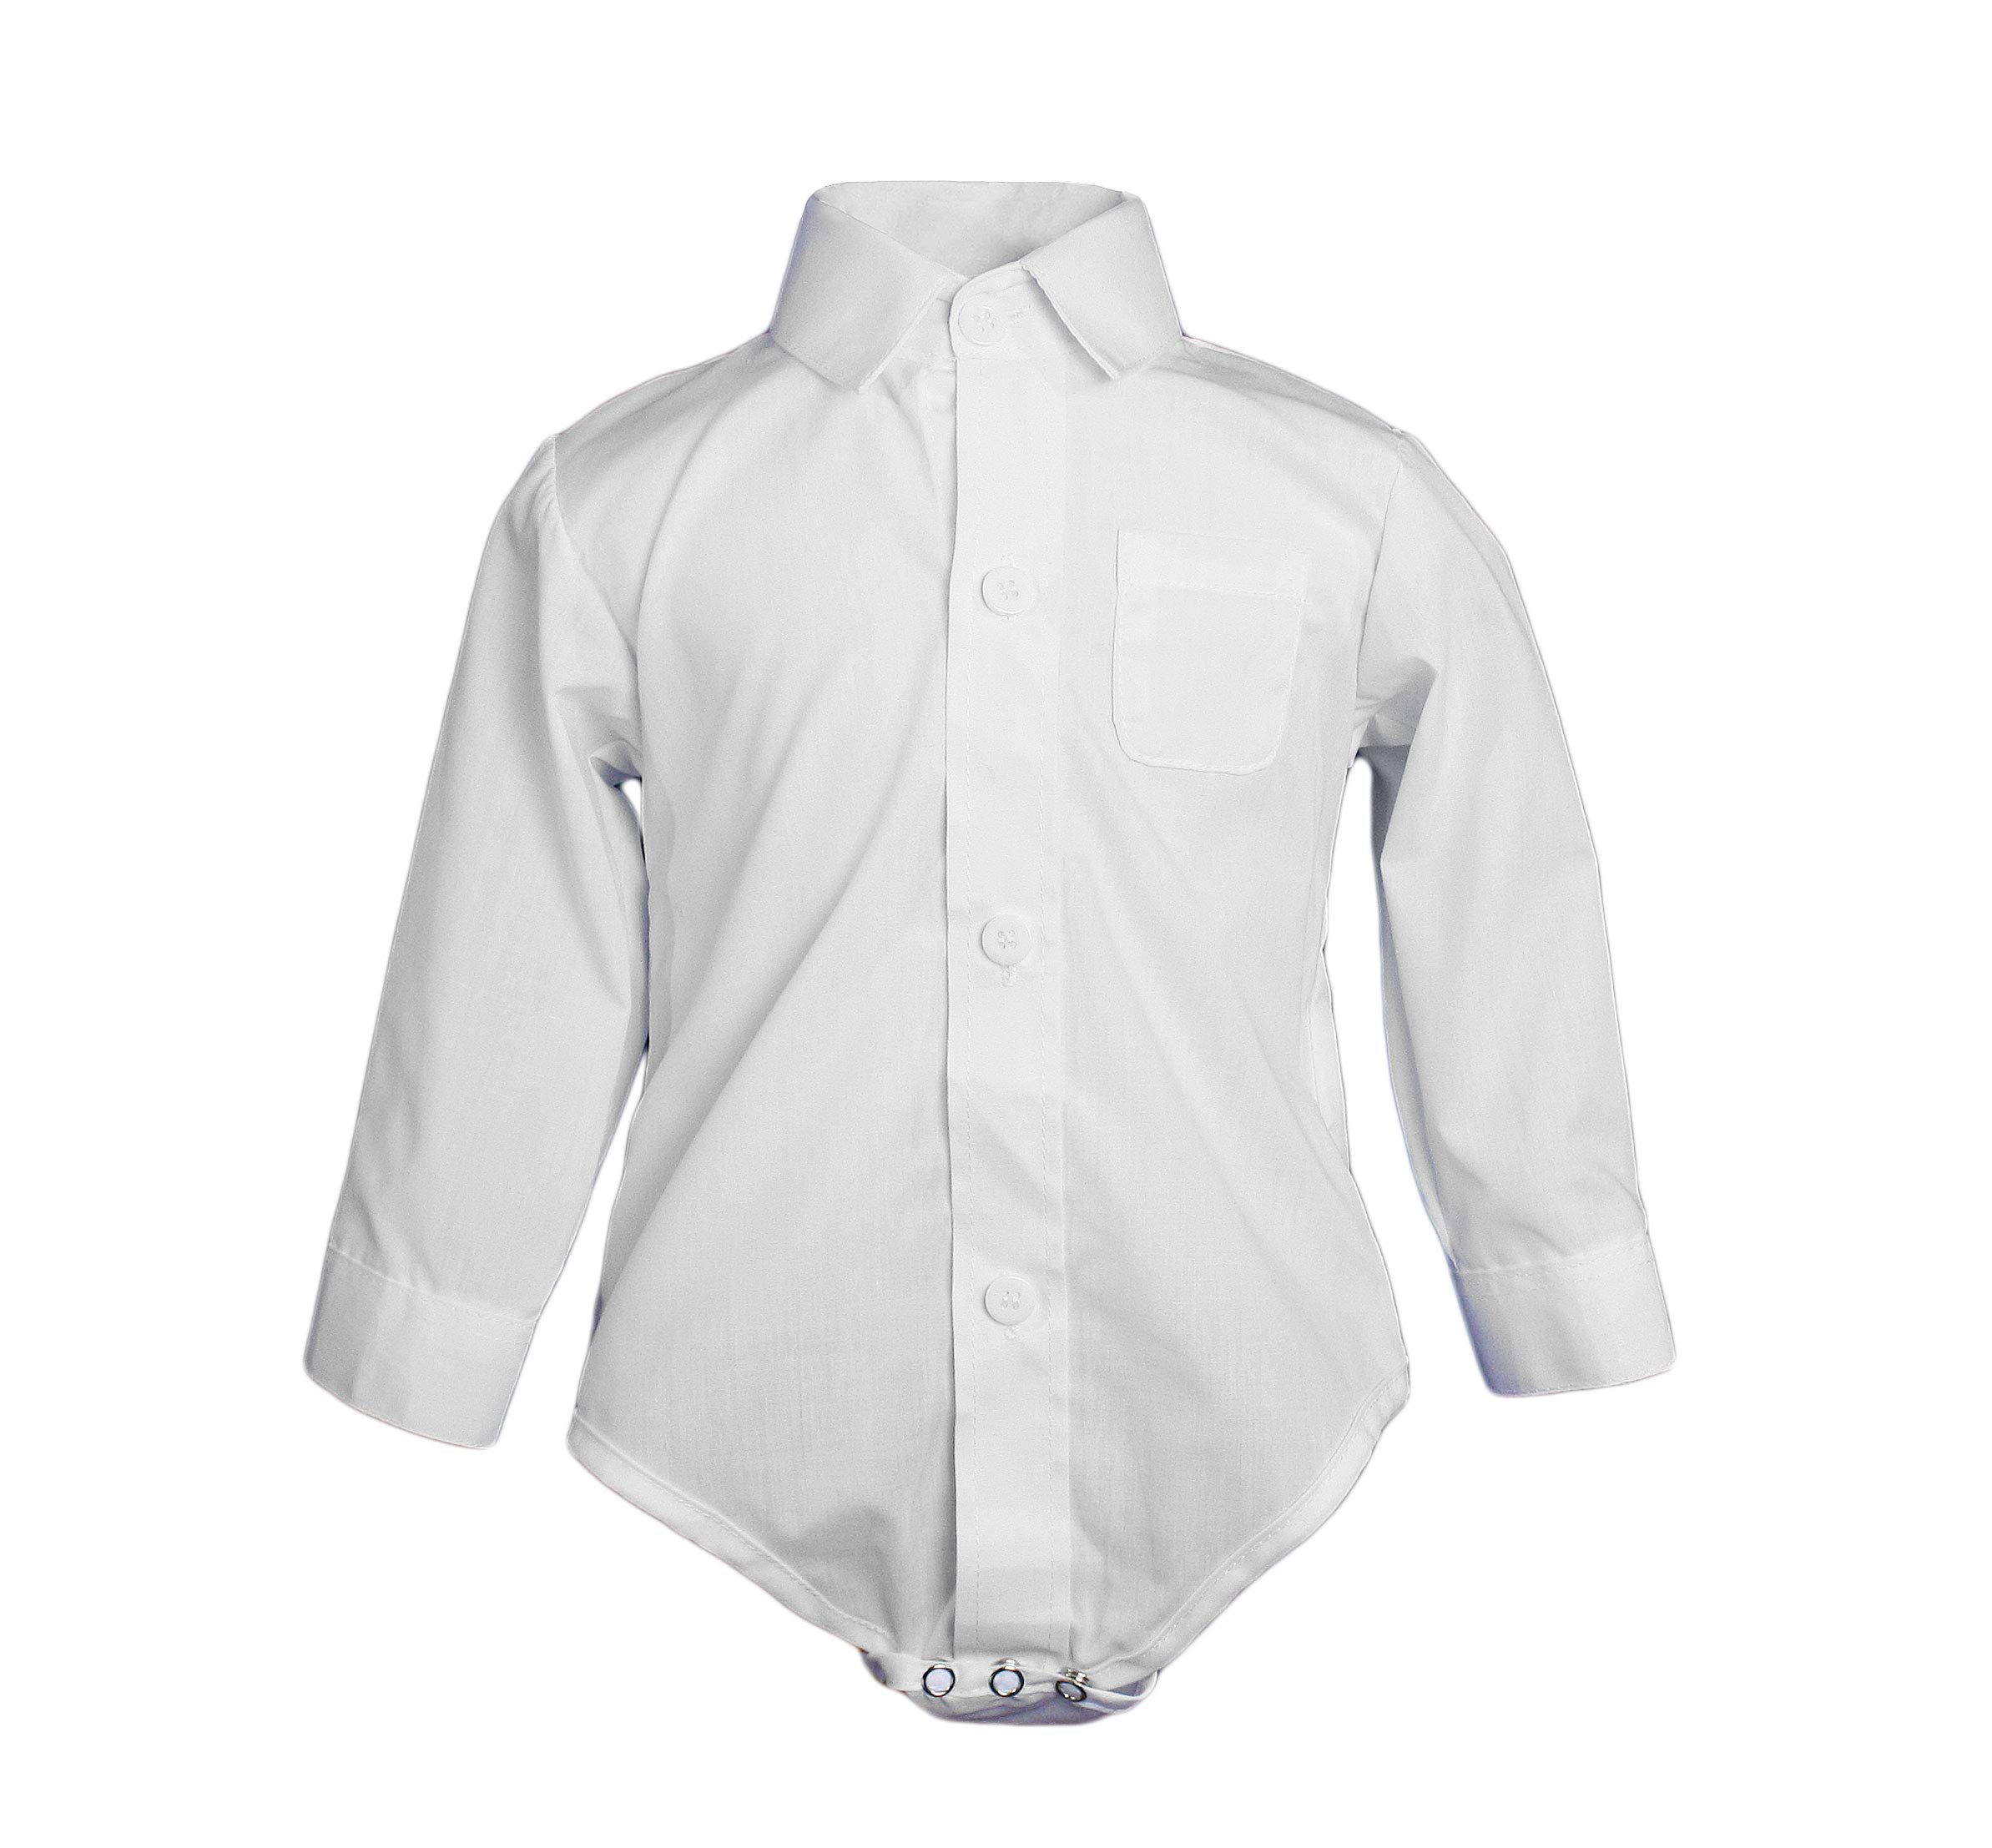 Little Things Mean A Lot Unisex Baby Poly Cotton Button Up White Dress Shirt Bodysuit Romper with Collar